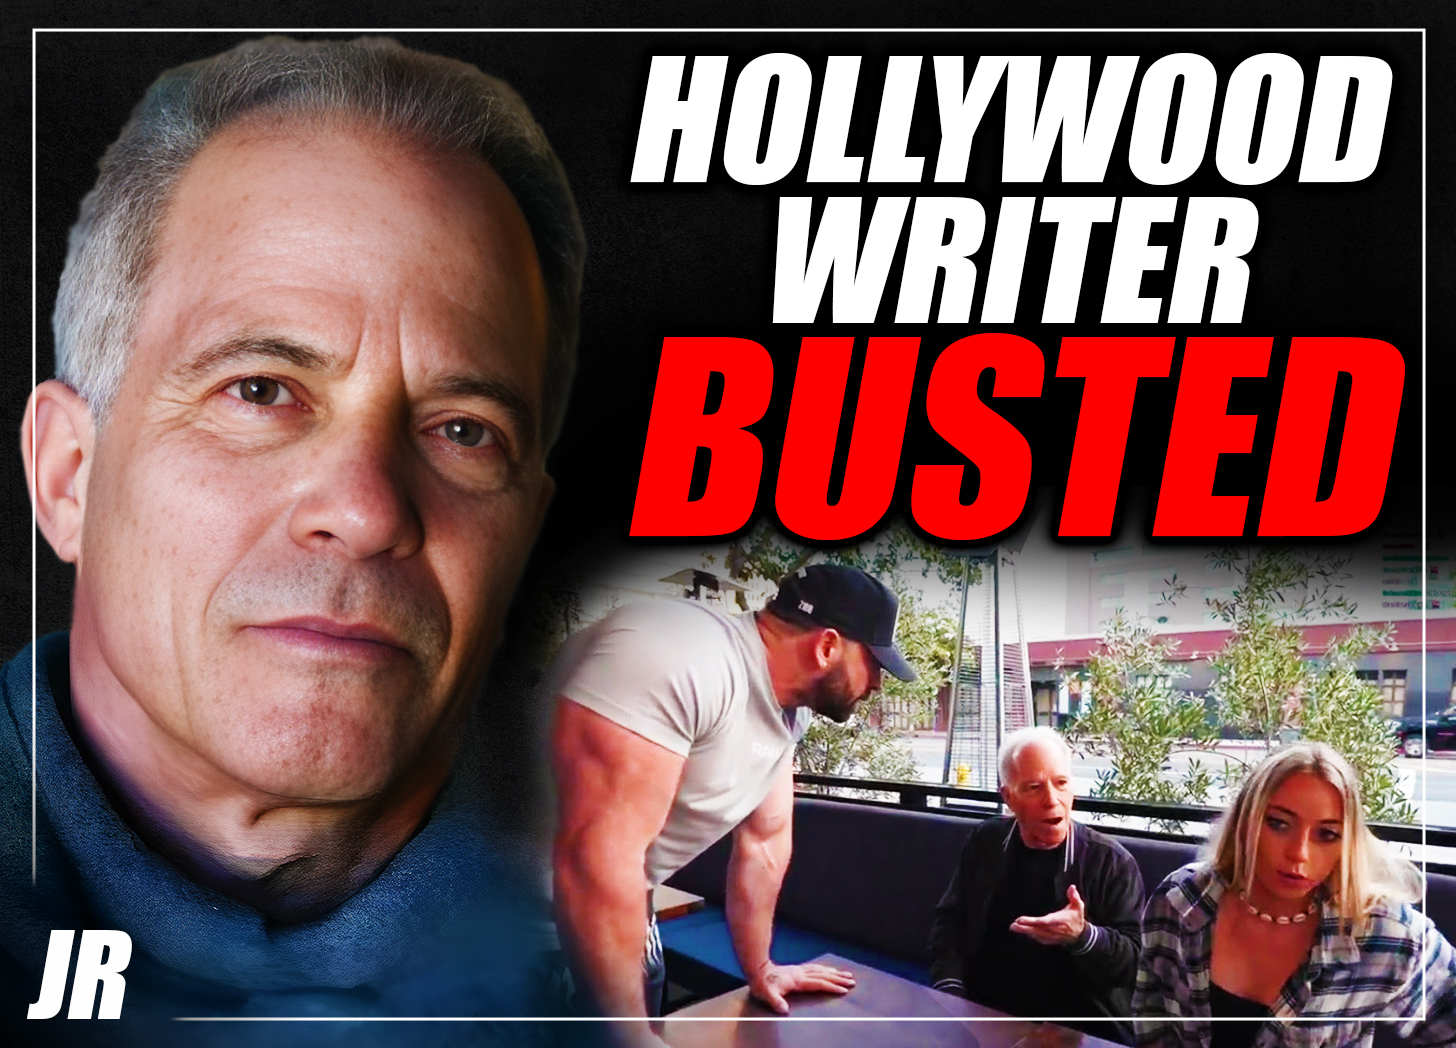 Jewish Hollywood screenwriter busted in  livestream pedophile sting